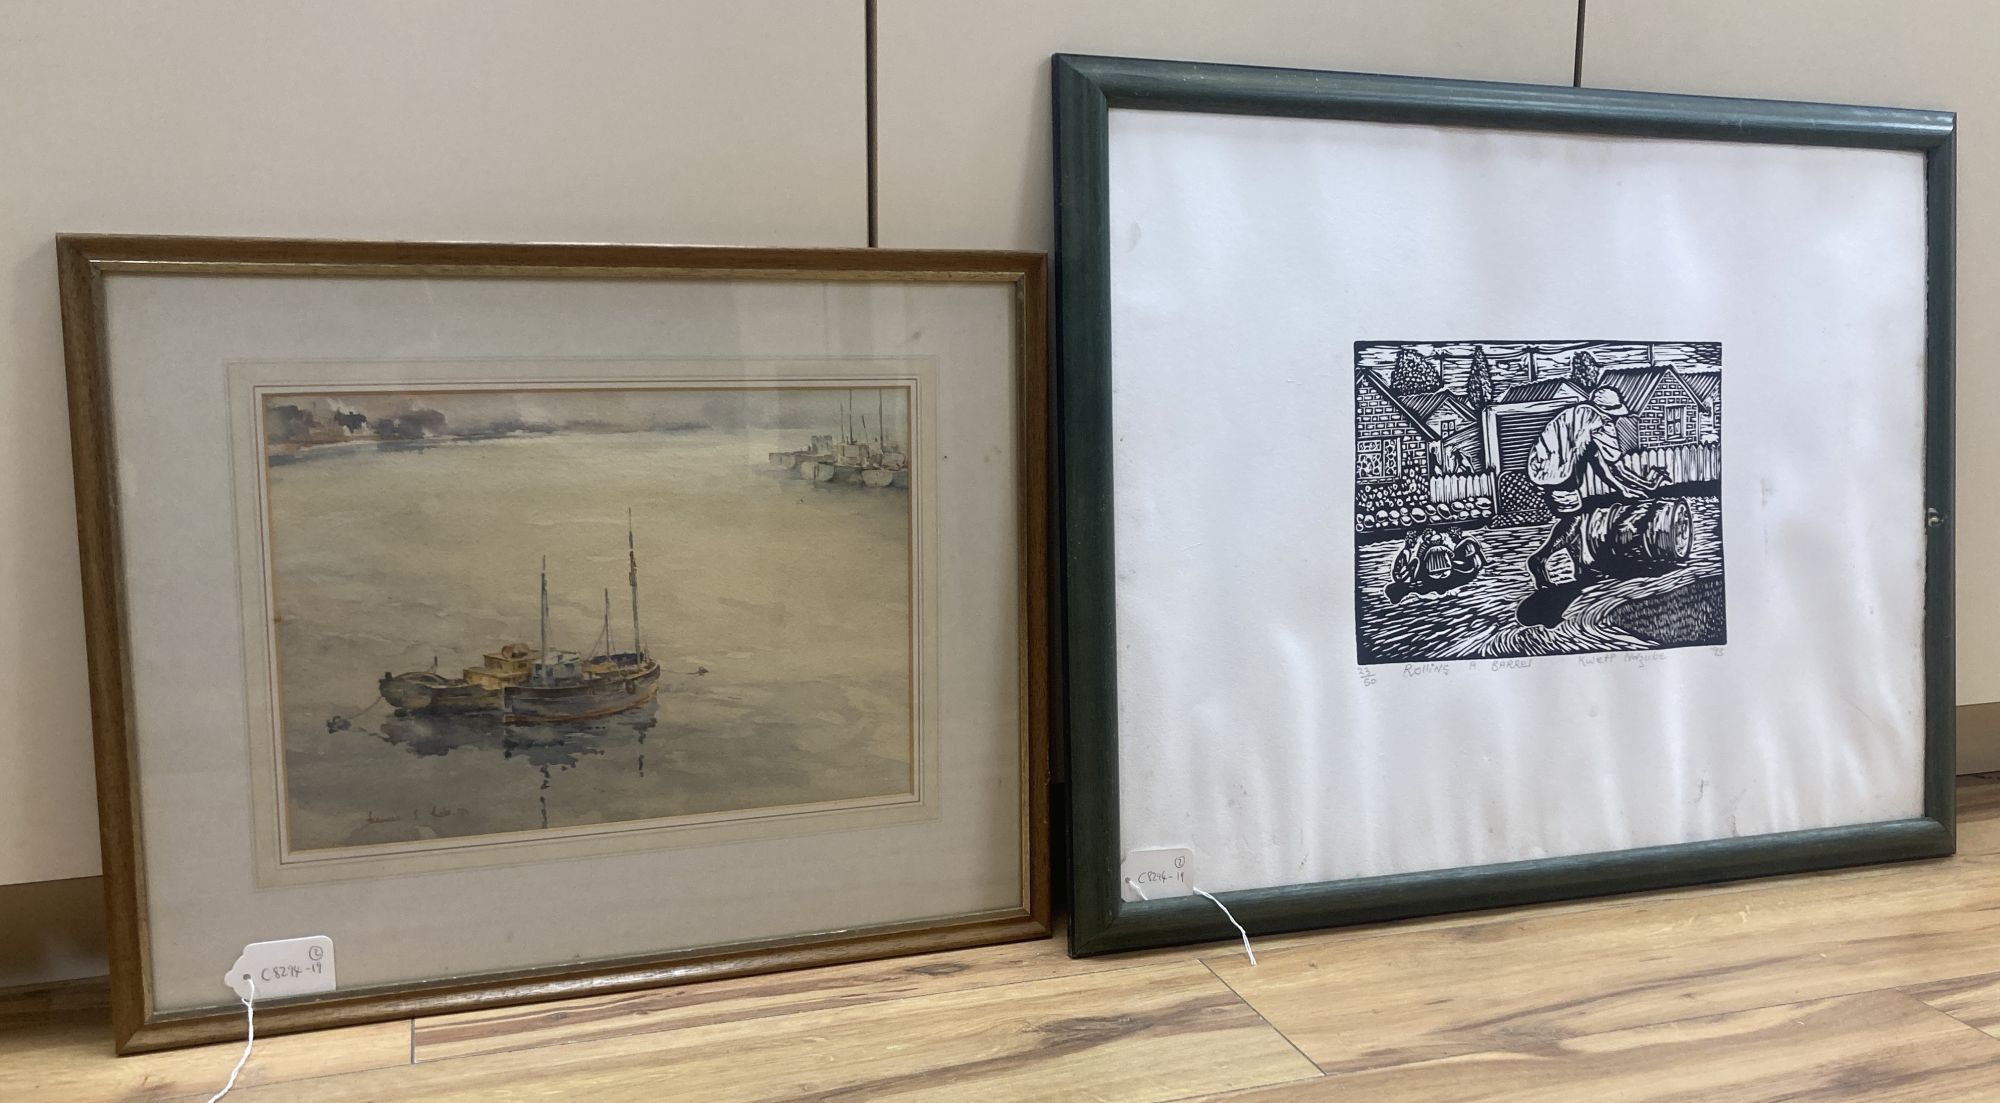 Francis S. Leke, watercolour, Fishing boats at anchor, signed and dated 72, 25 x 36cm, and a linocut by K. Ndzube